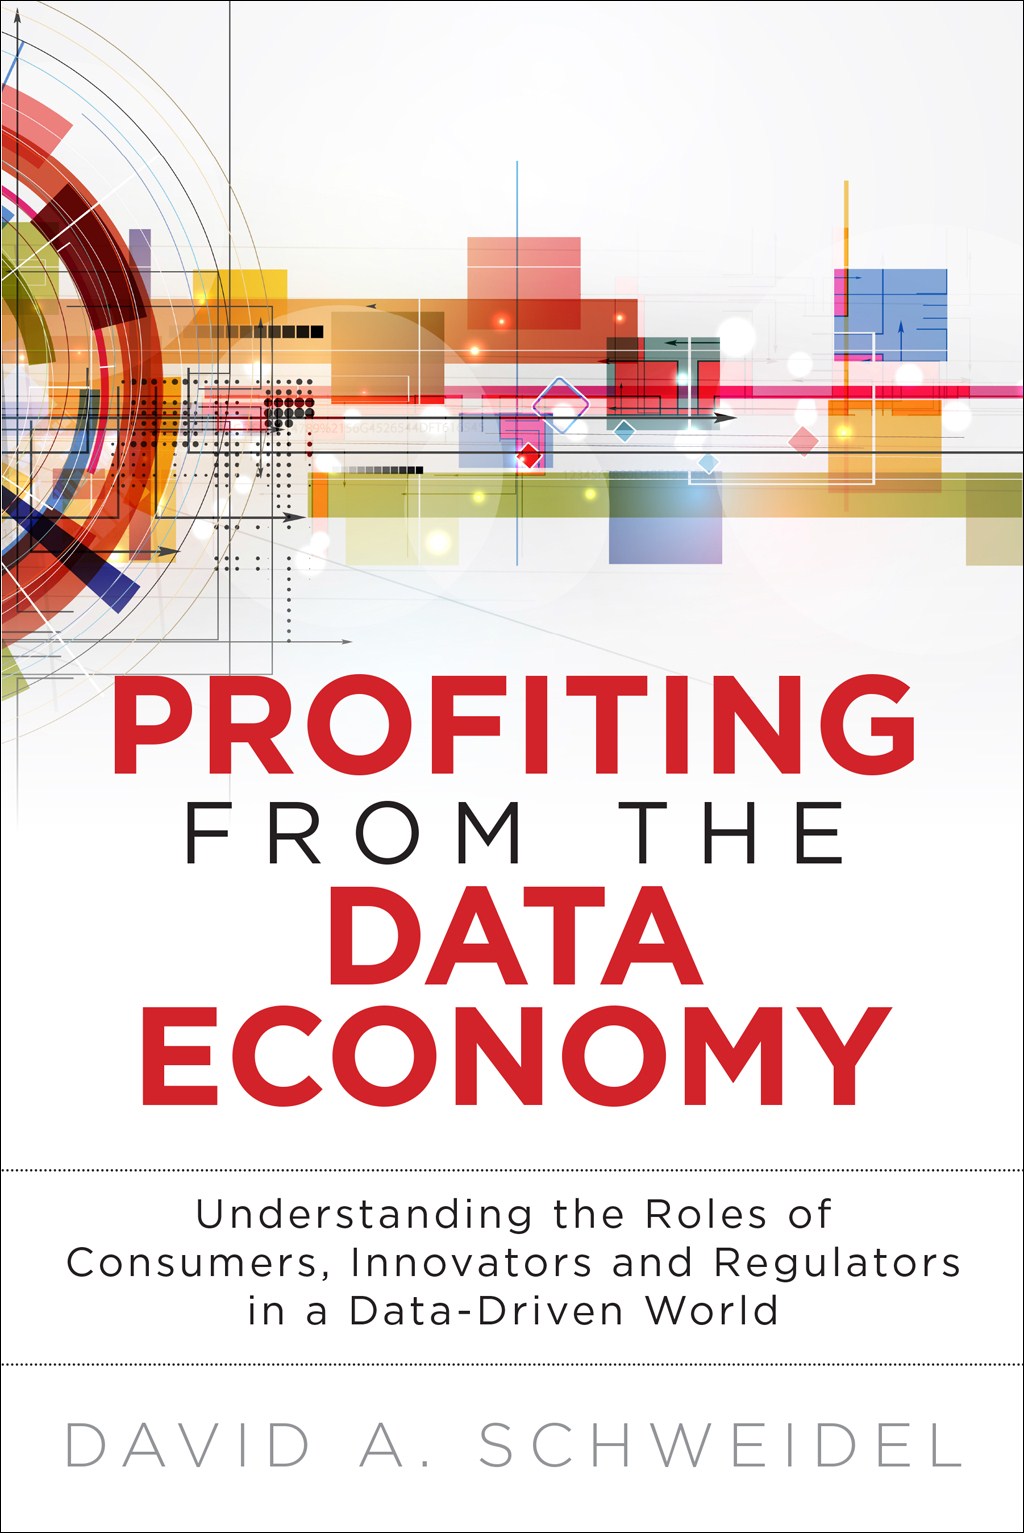 Profiting from the Data Economy: Understanding the Roles of Consumers, Innovators and Regulators in a Data-Driven World